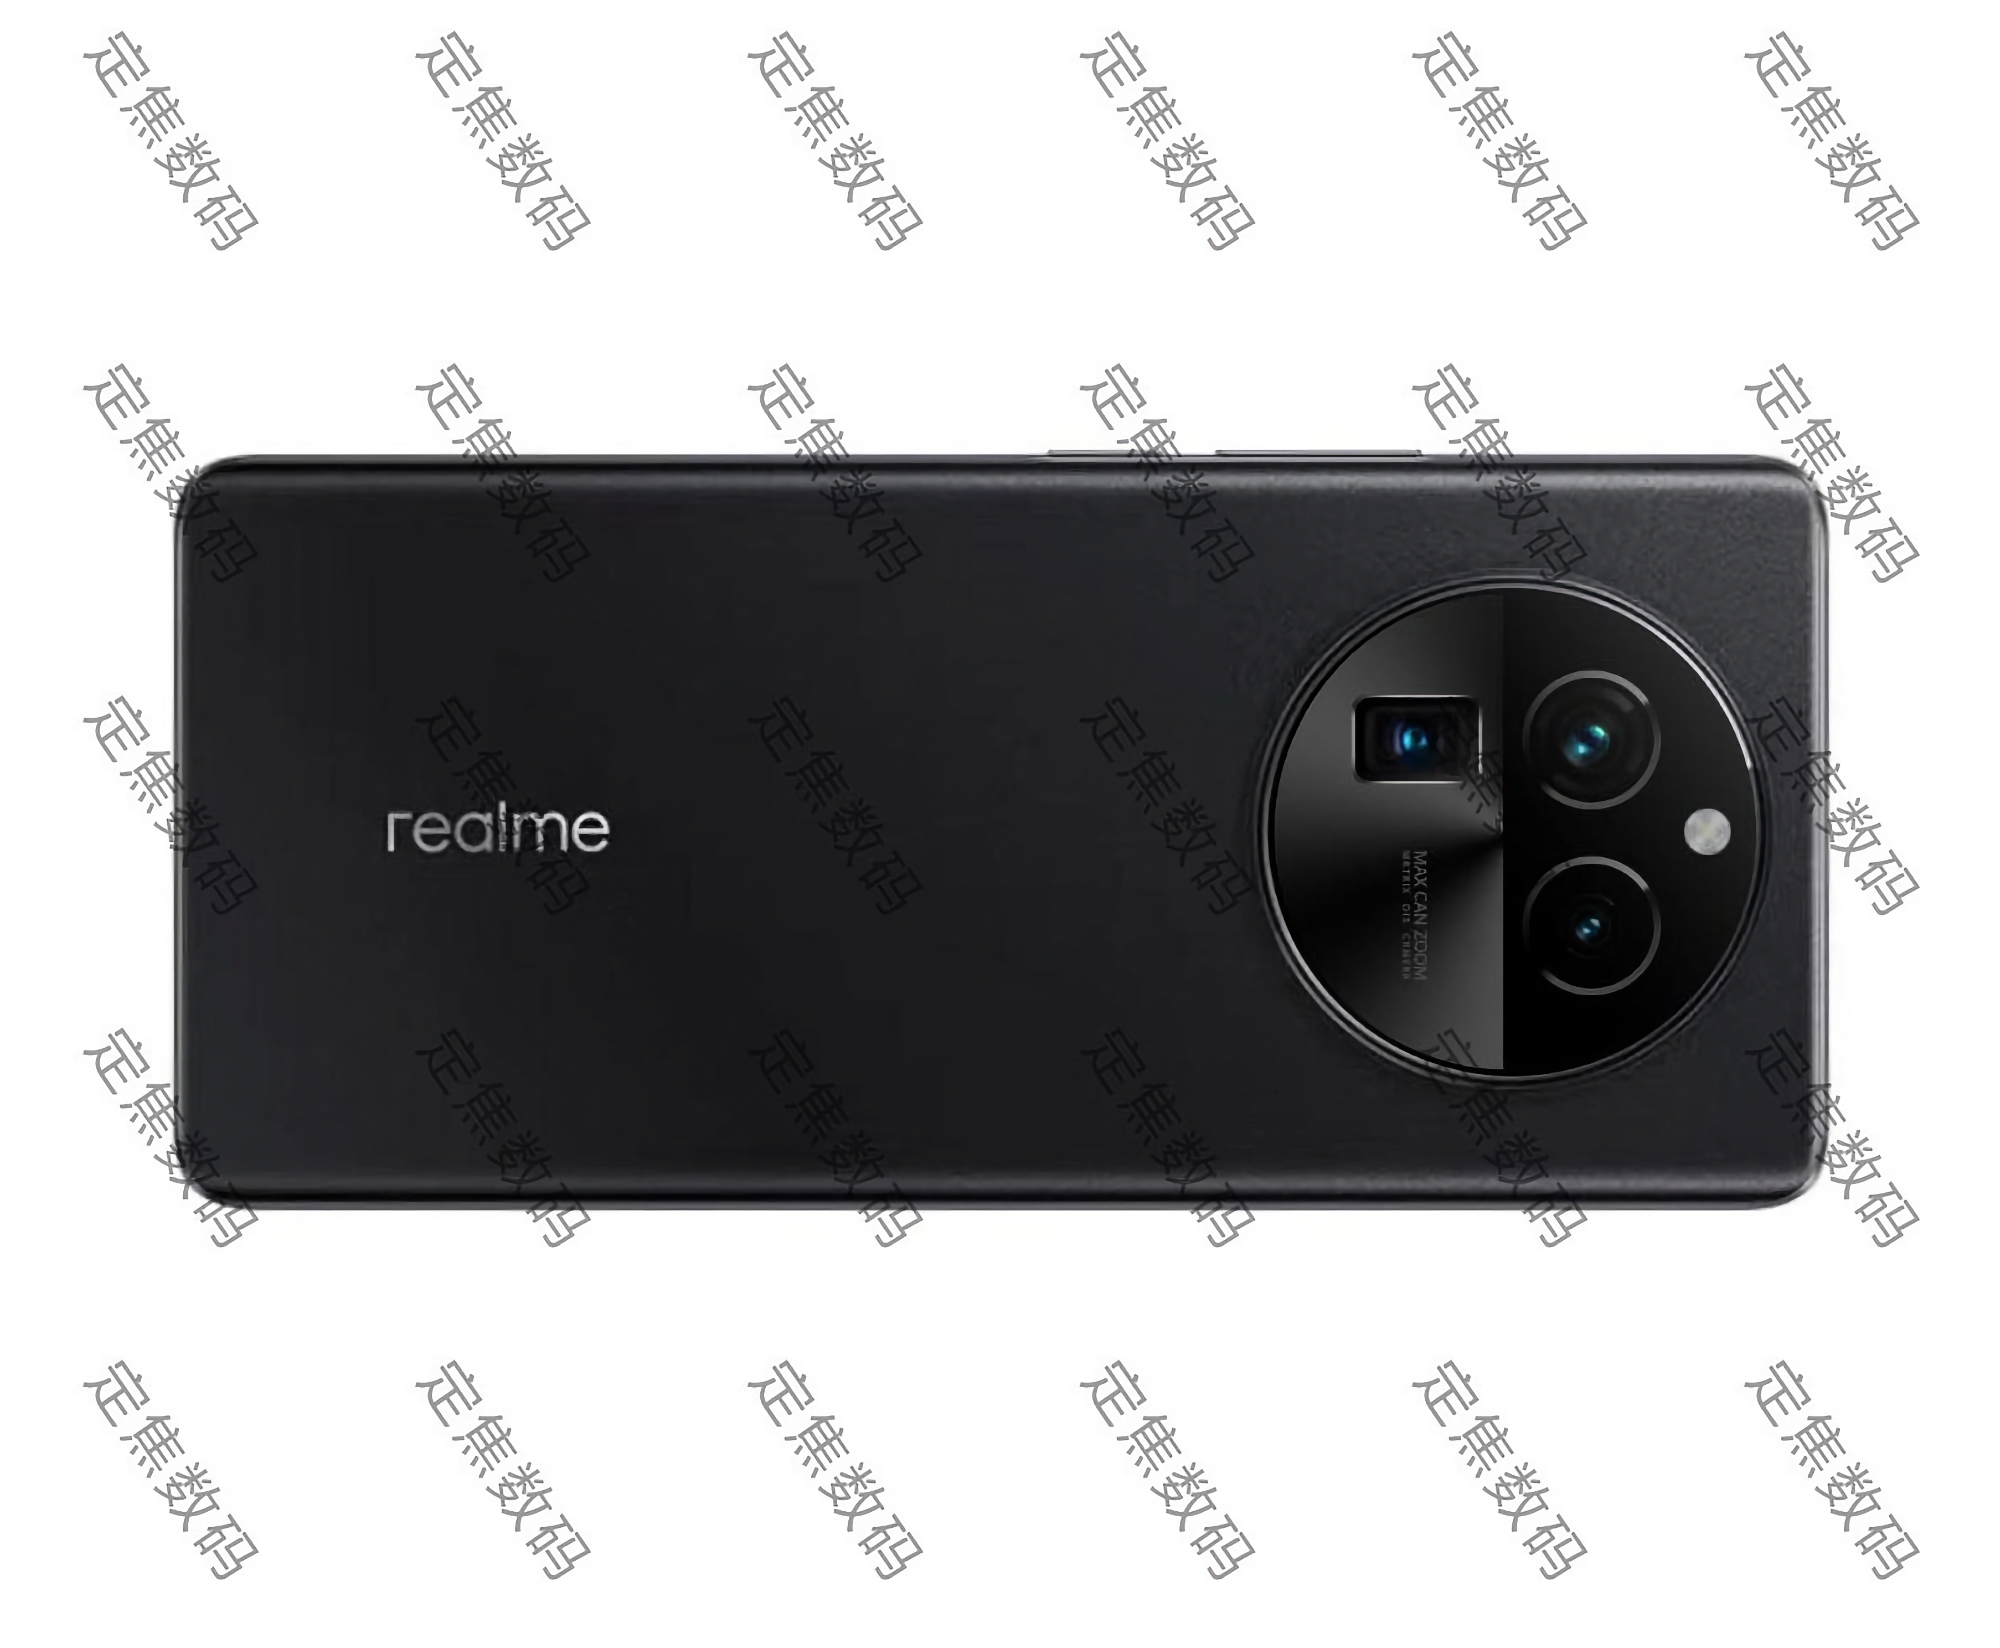 Here's what the realme 12 Pro+ will look like: the company's new smartphone with a periscope camera